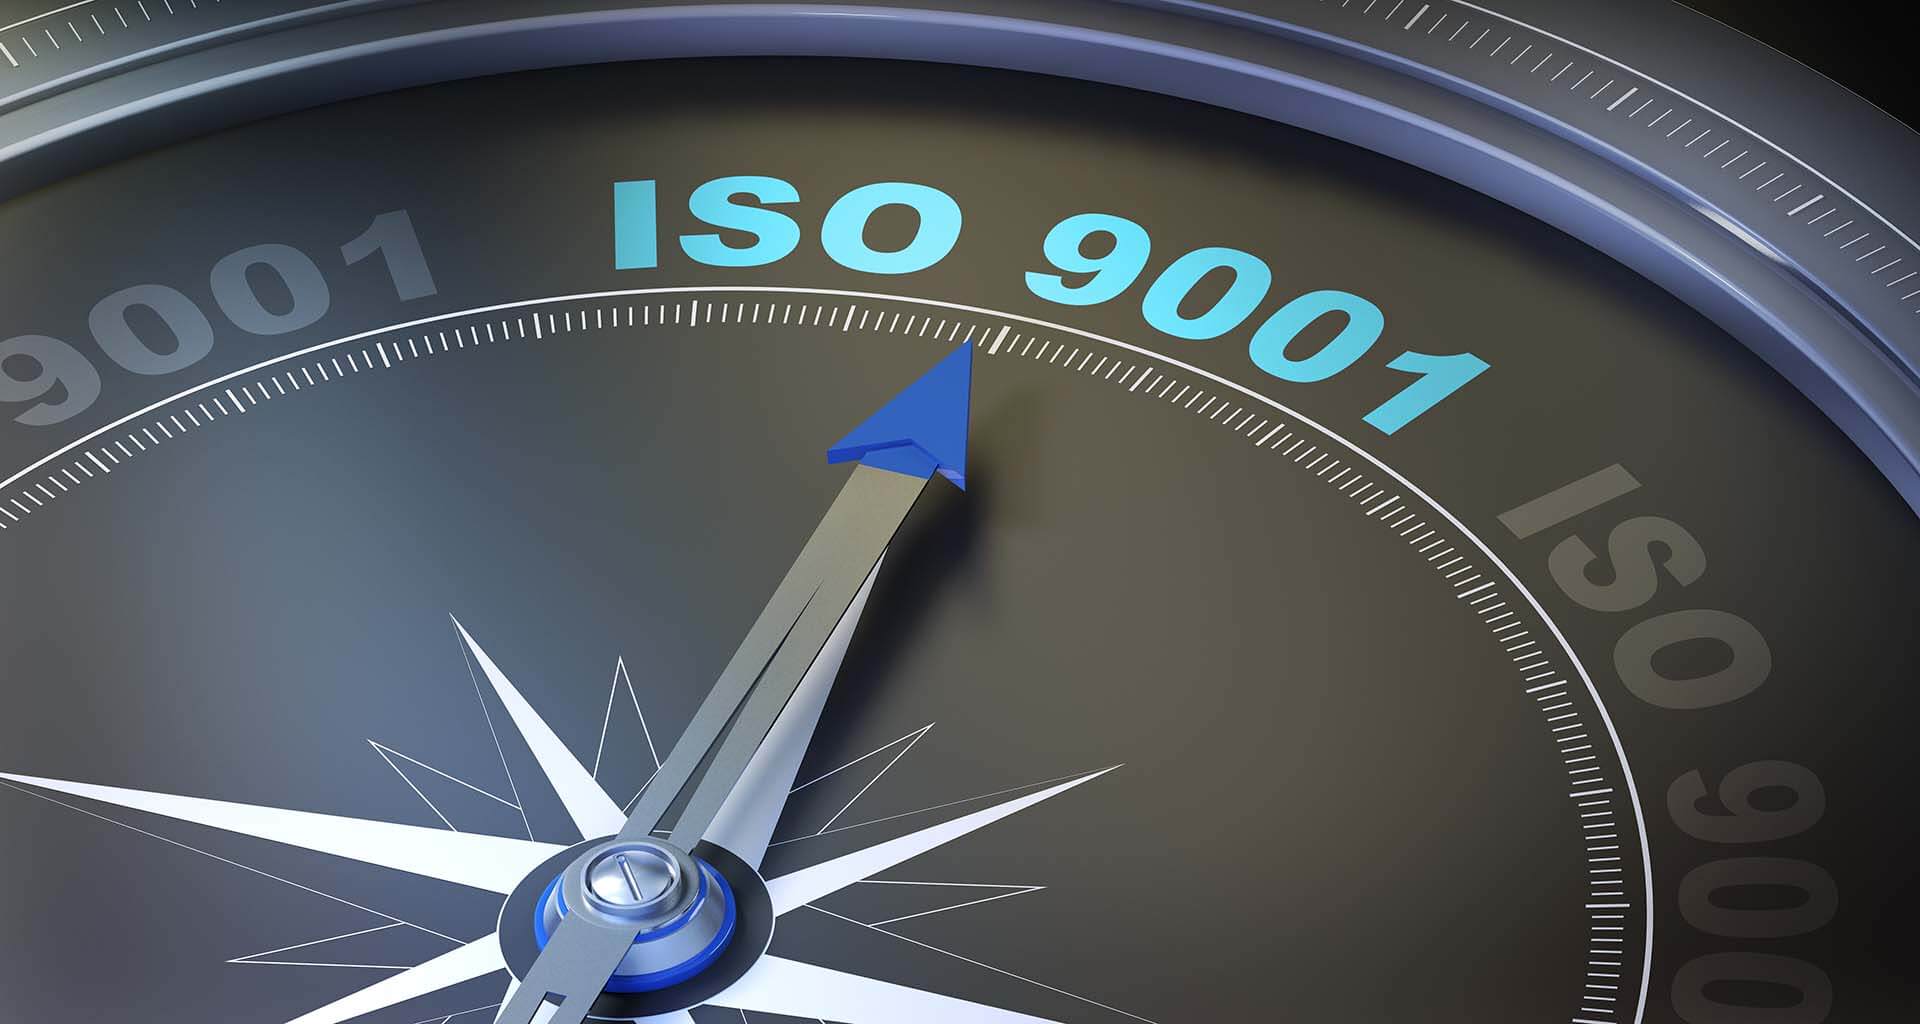 CakeBoxx Achieves ISO Certification